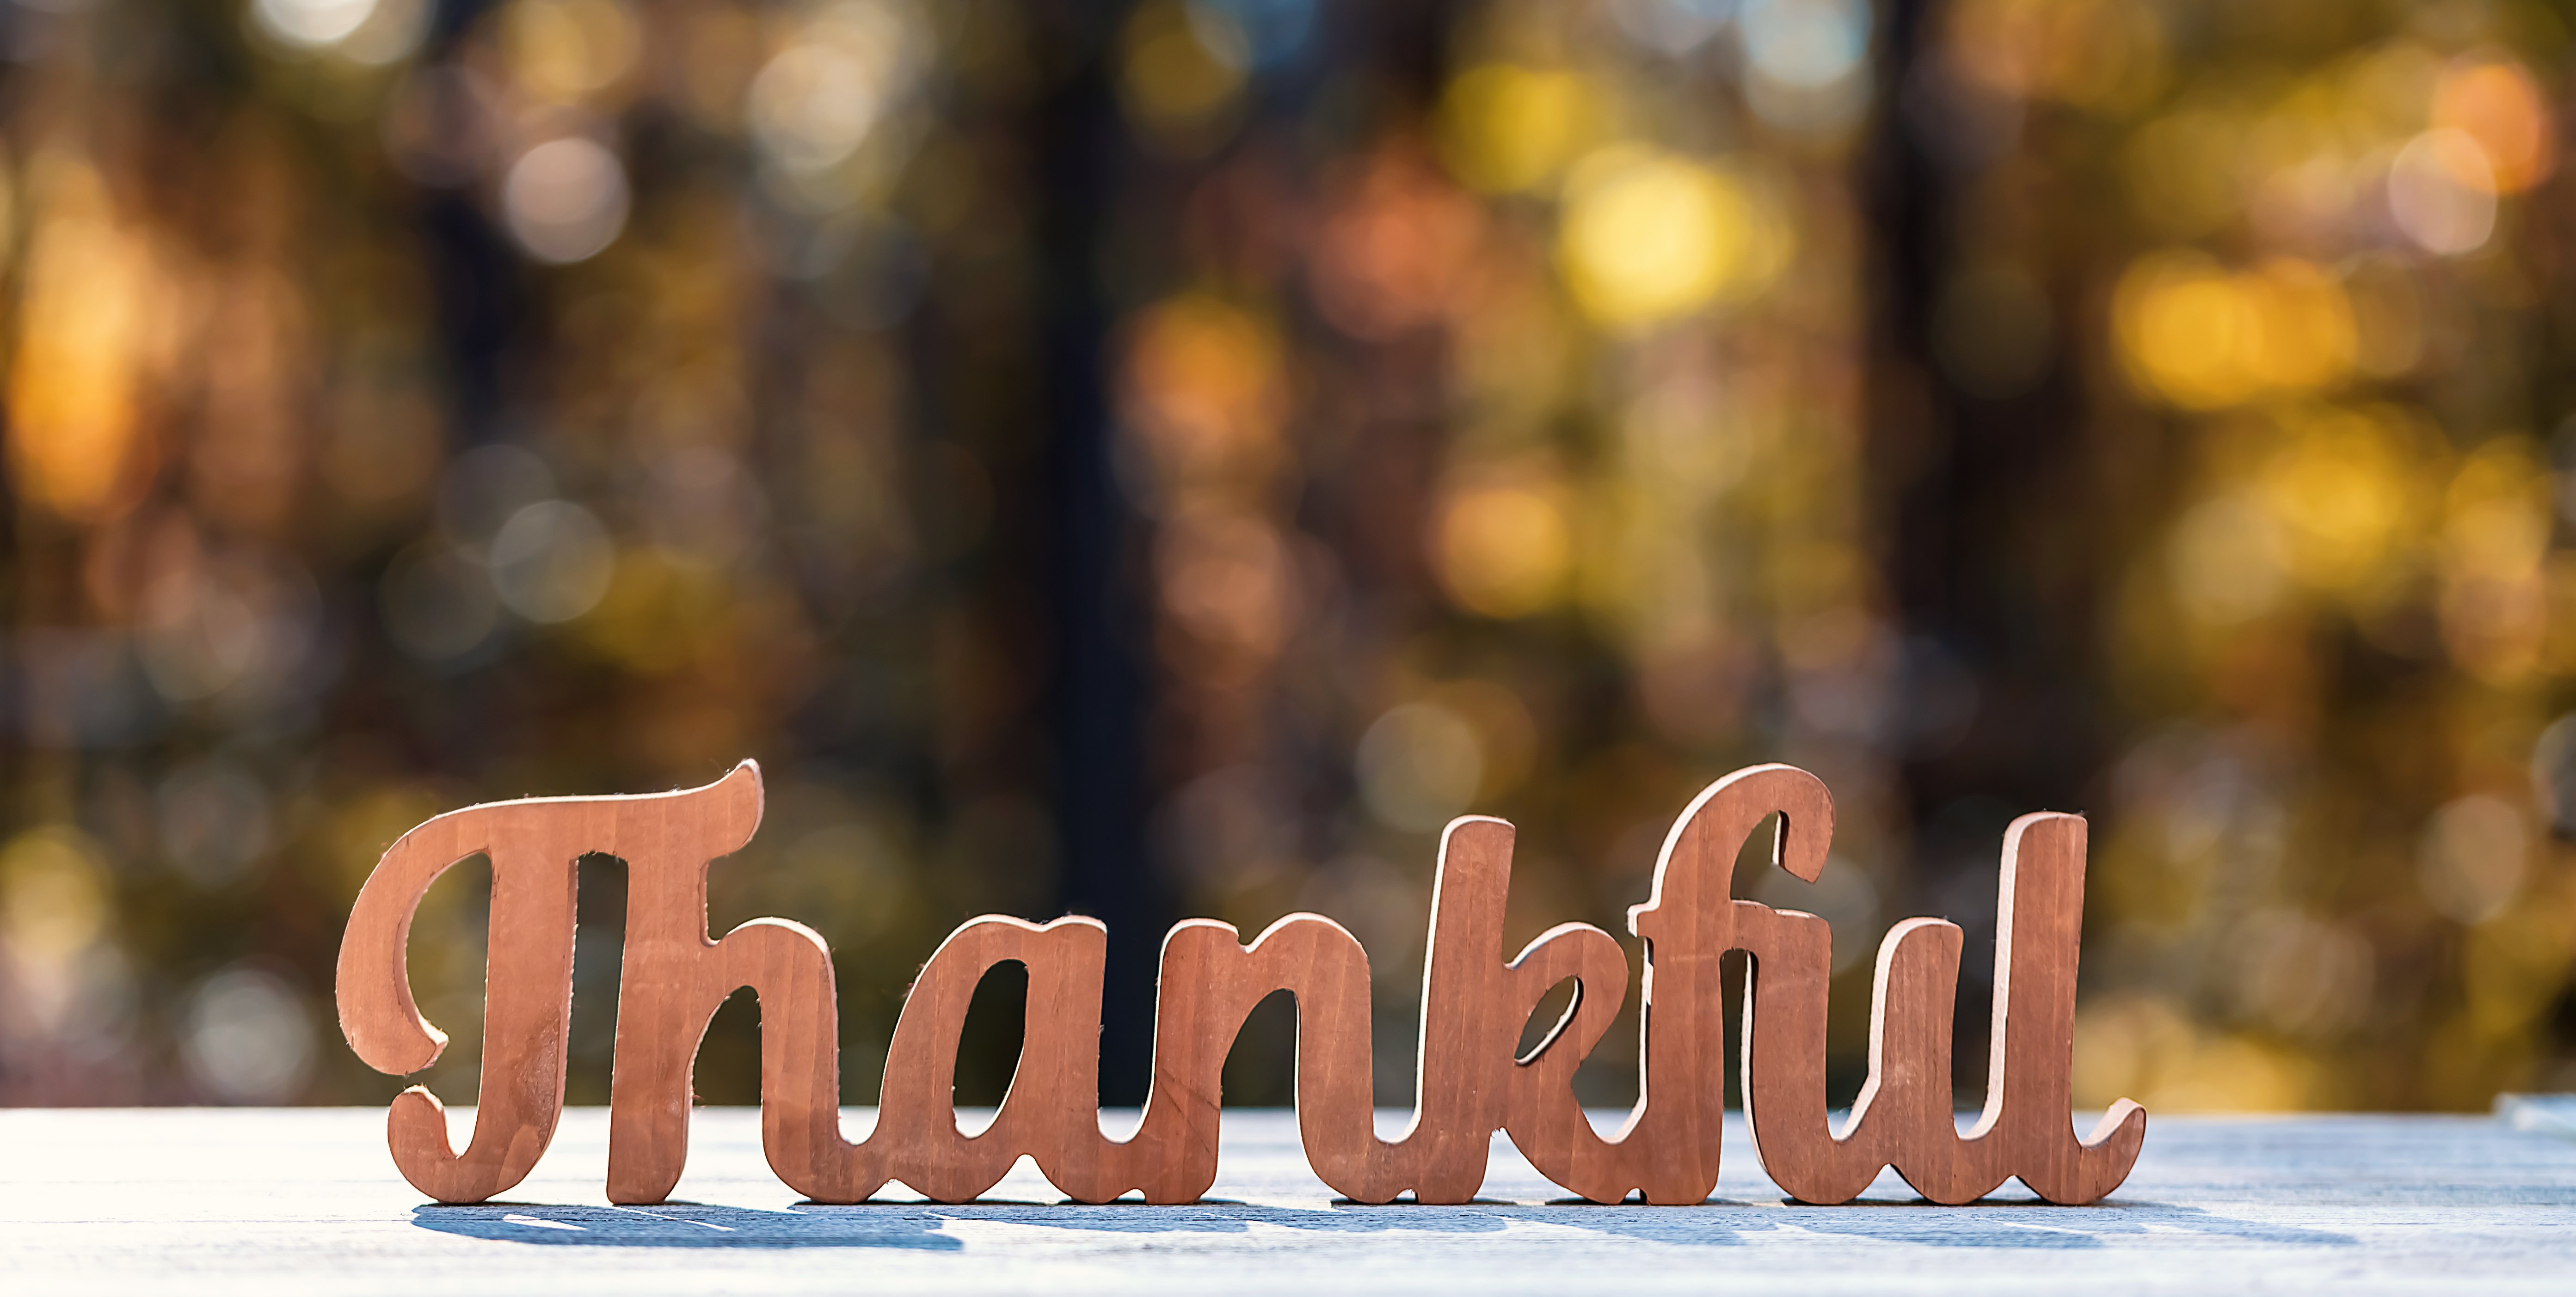 healthcare communications and marketing professionals share what they are grateful for